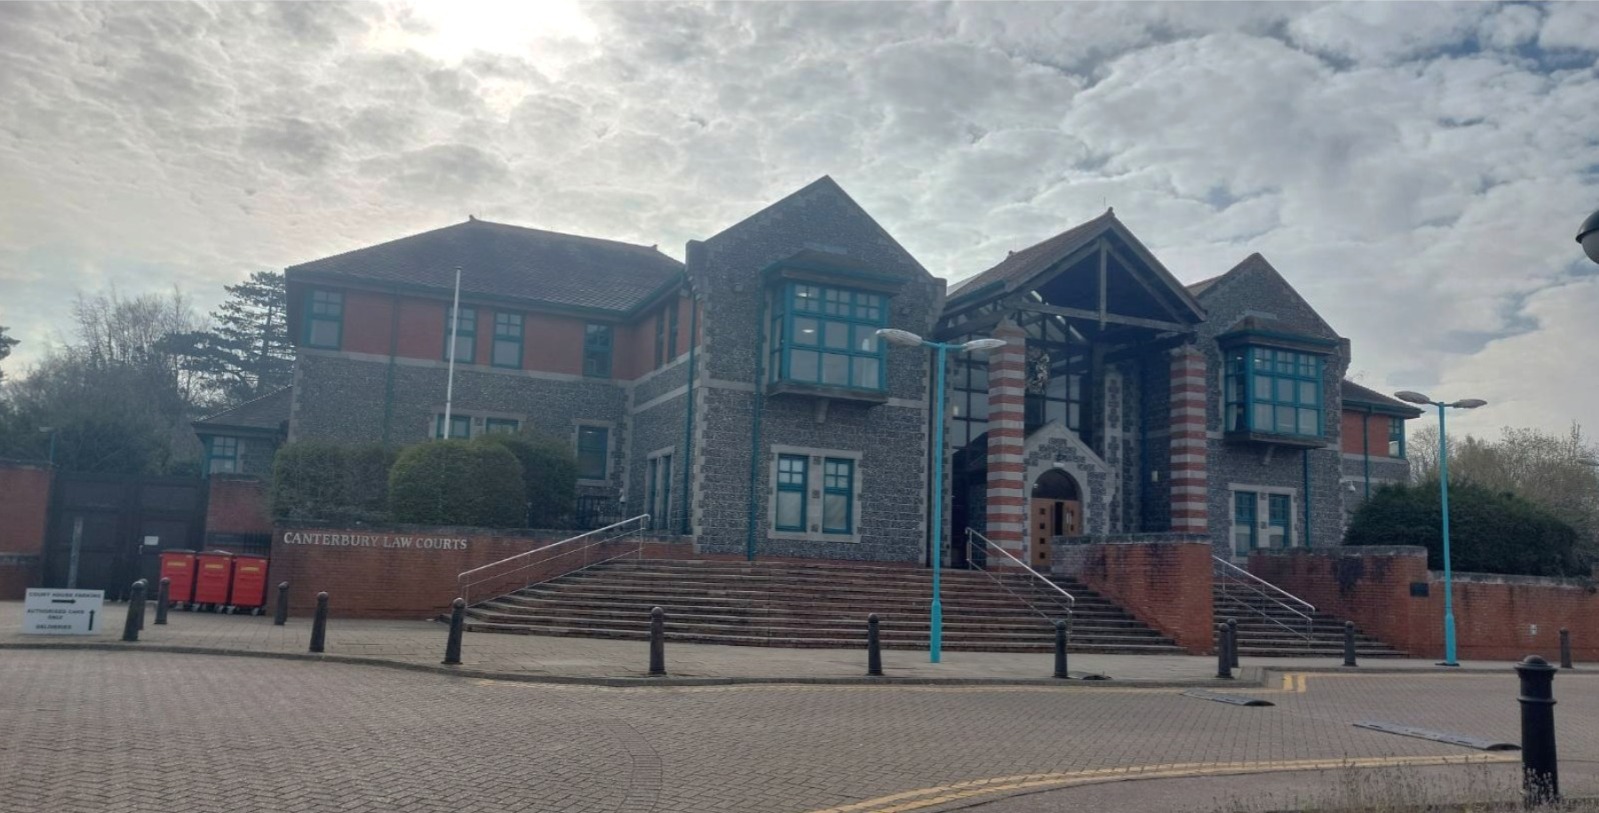 Image: Canterbury Crown Court, taken by a member of Captain Support UK